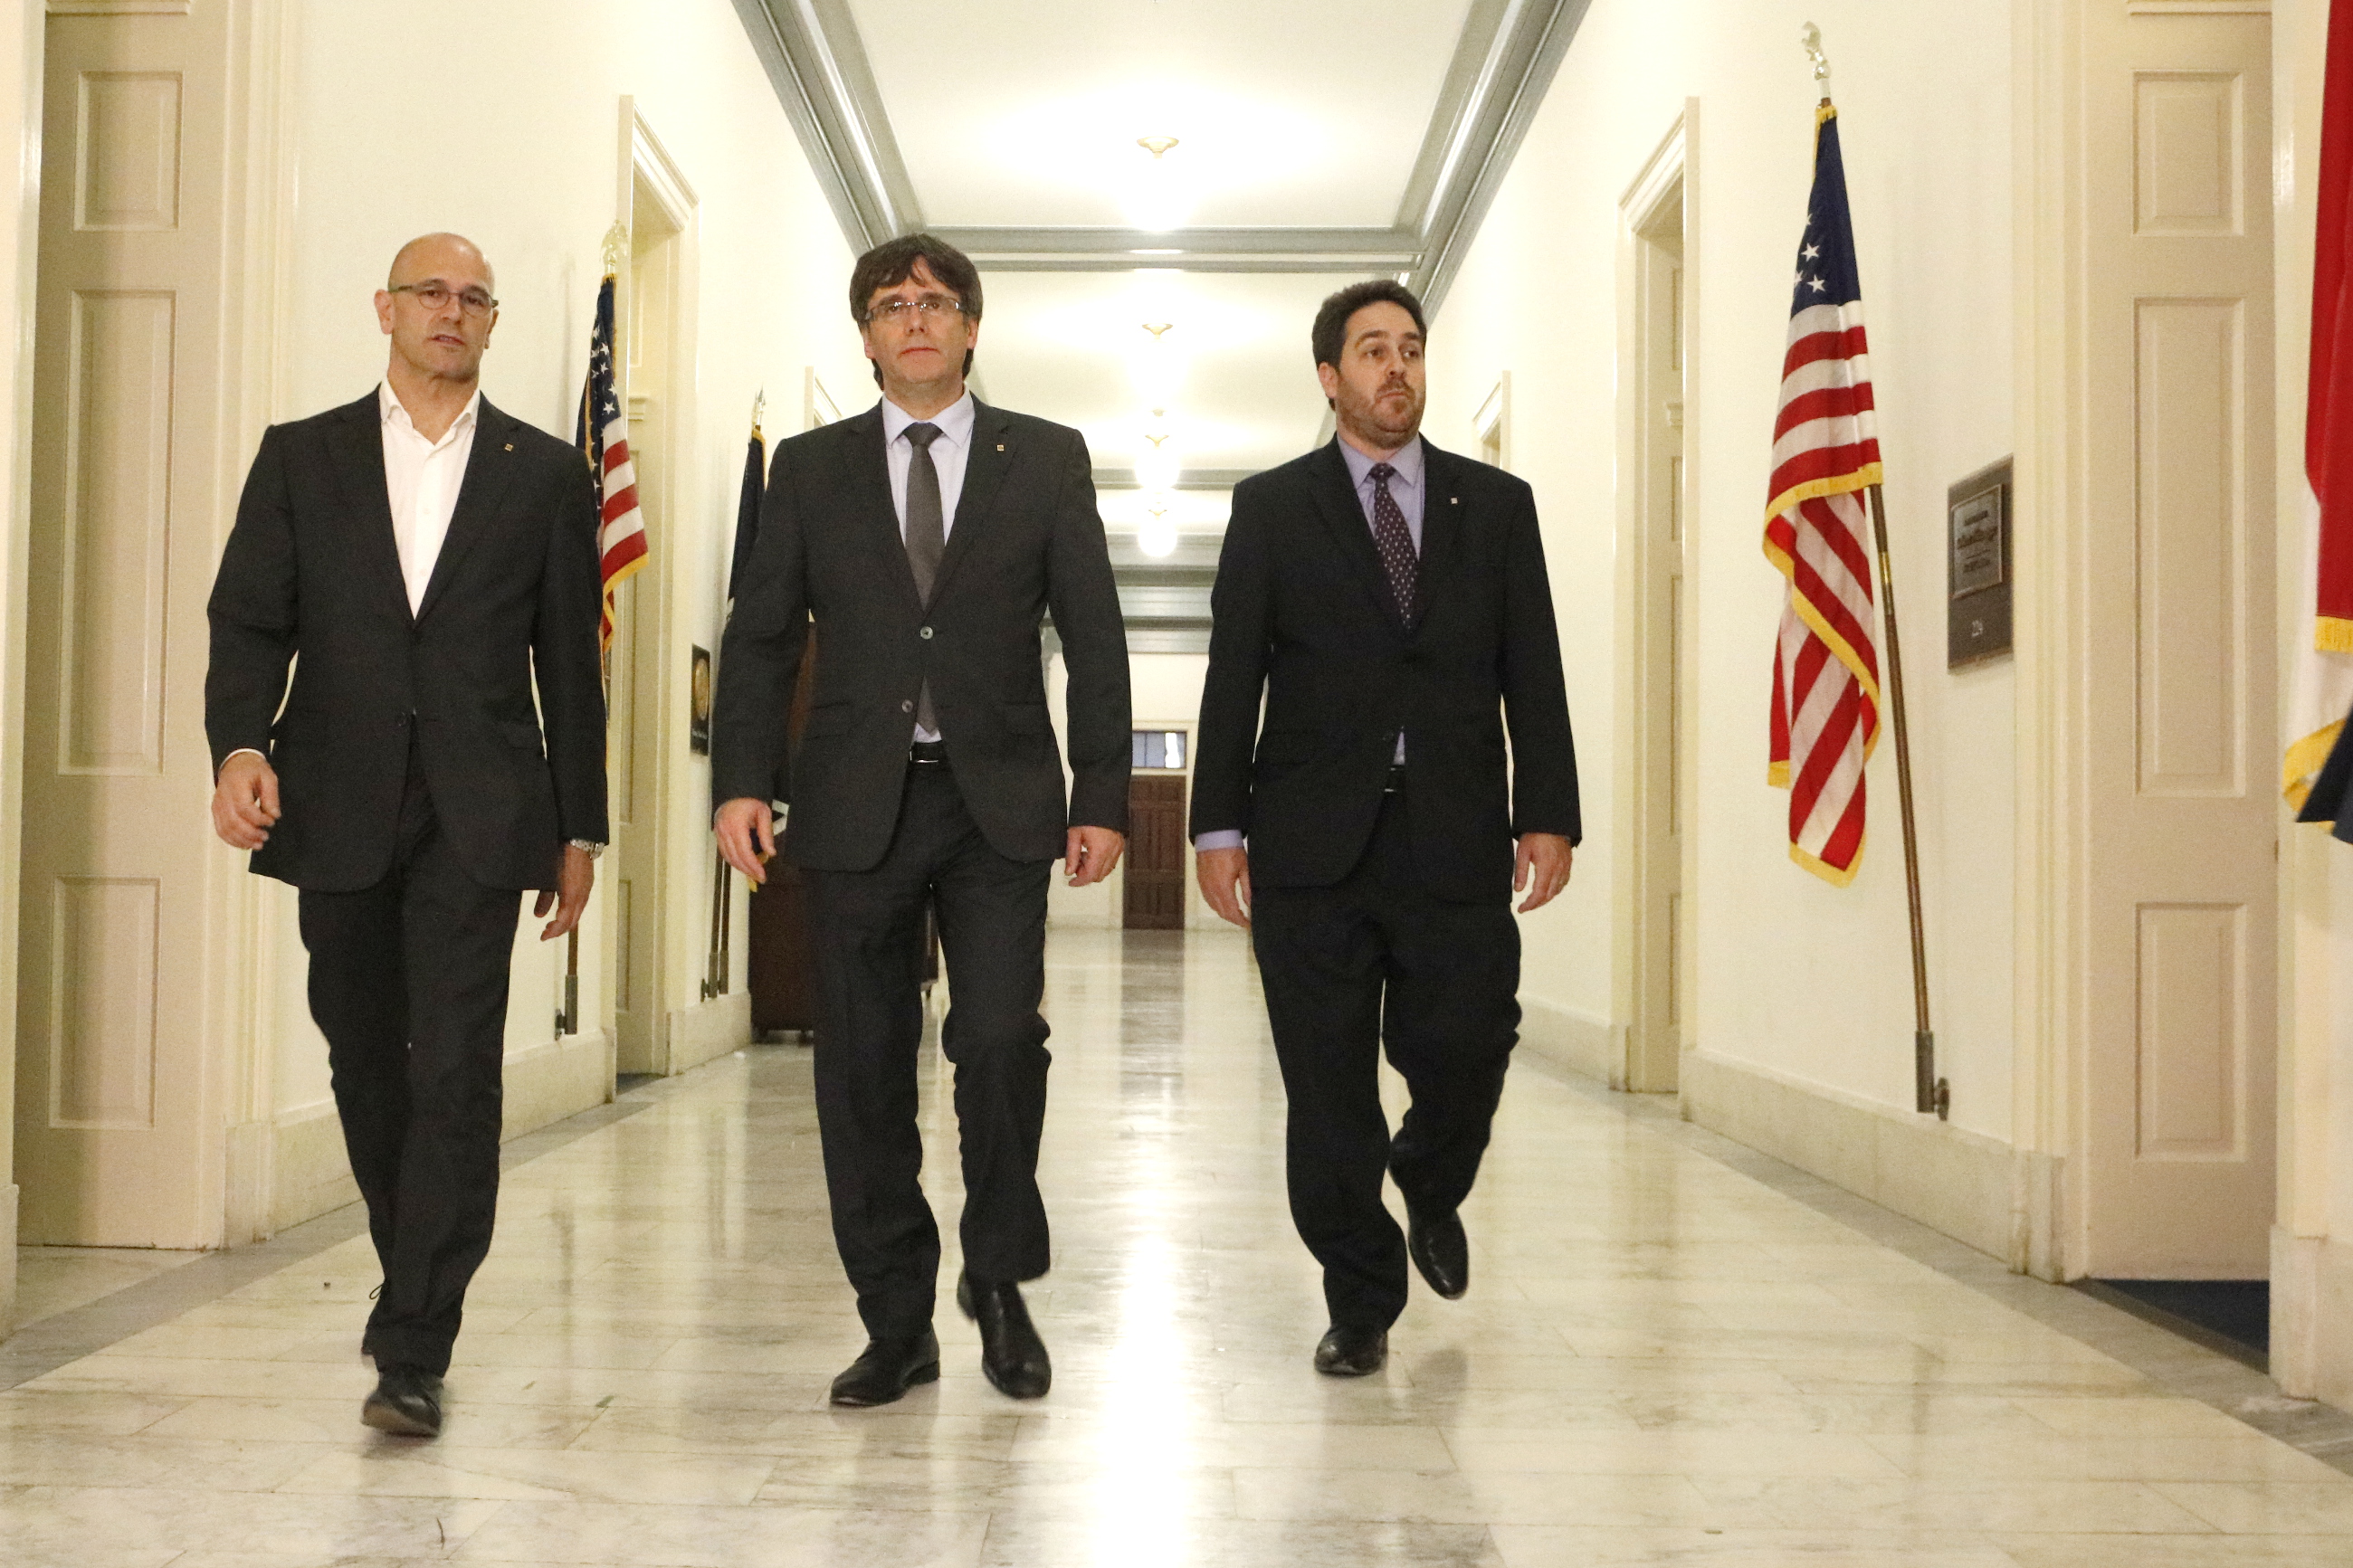 Catalan President, Carles Puigdemont, together with Catalan Minister for Foreign Affairs, Raül Romeva and and the Delegate of the Catalan Government to the United States, Andrew Davis, at the US Congress in Washington DC (by ACN) 